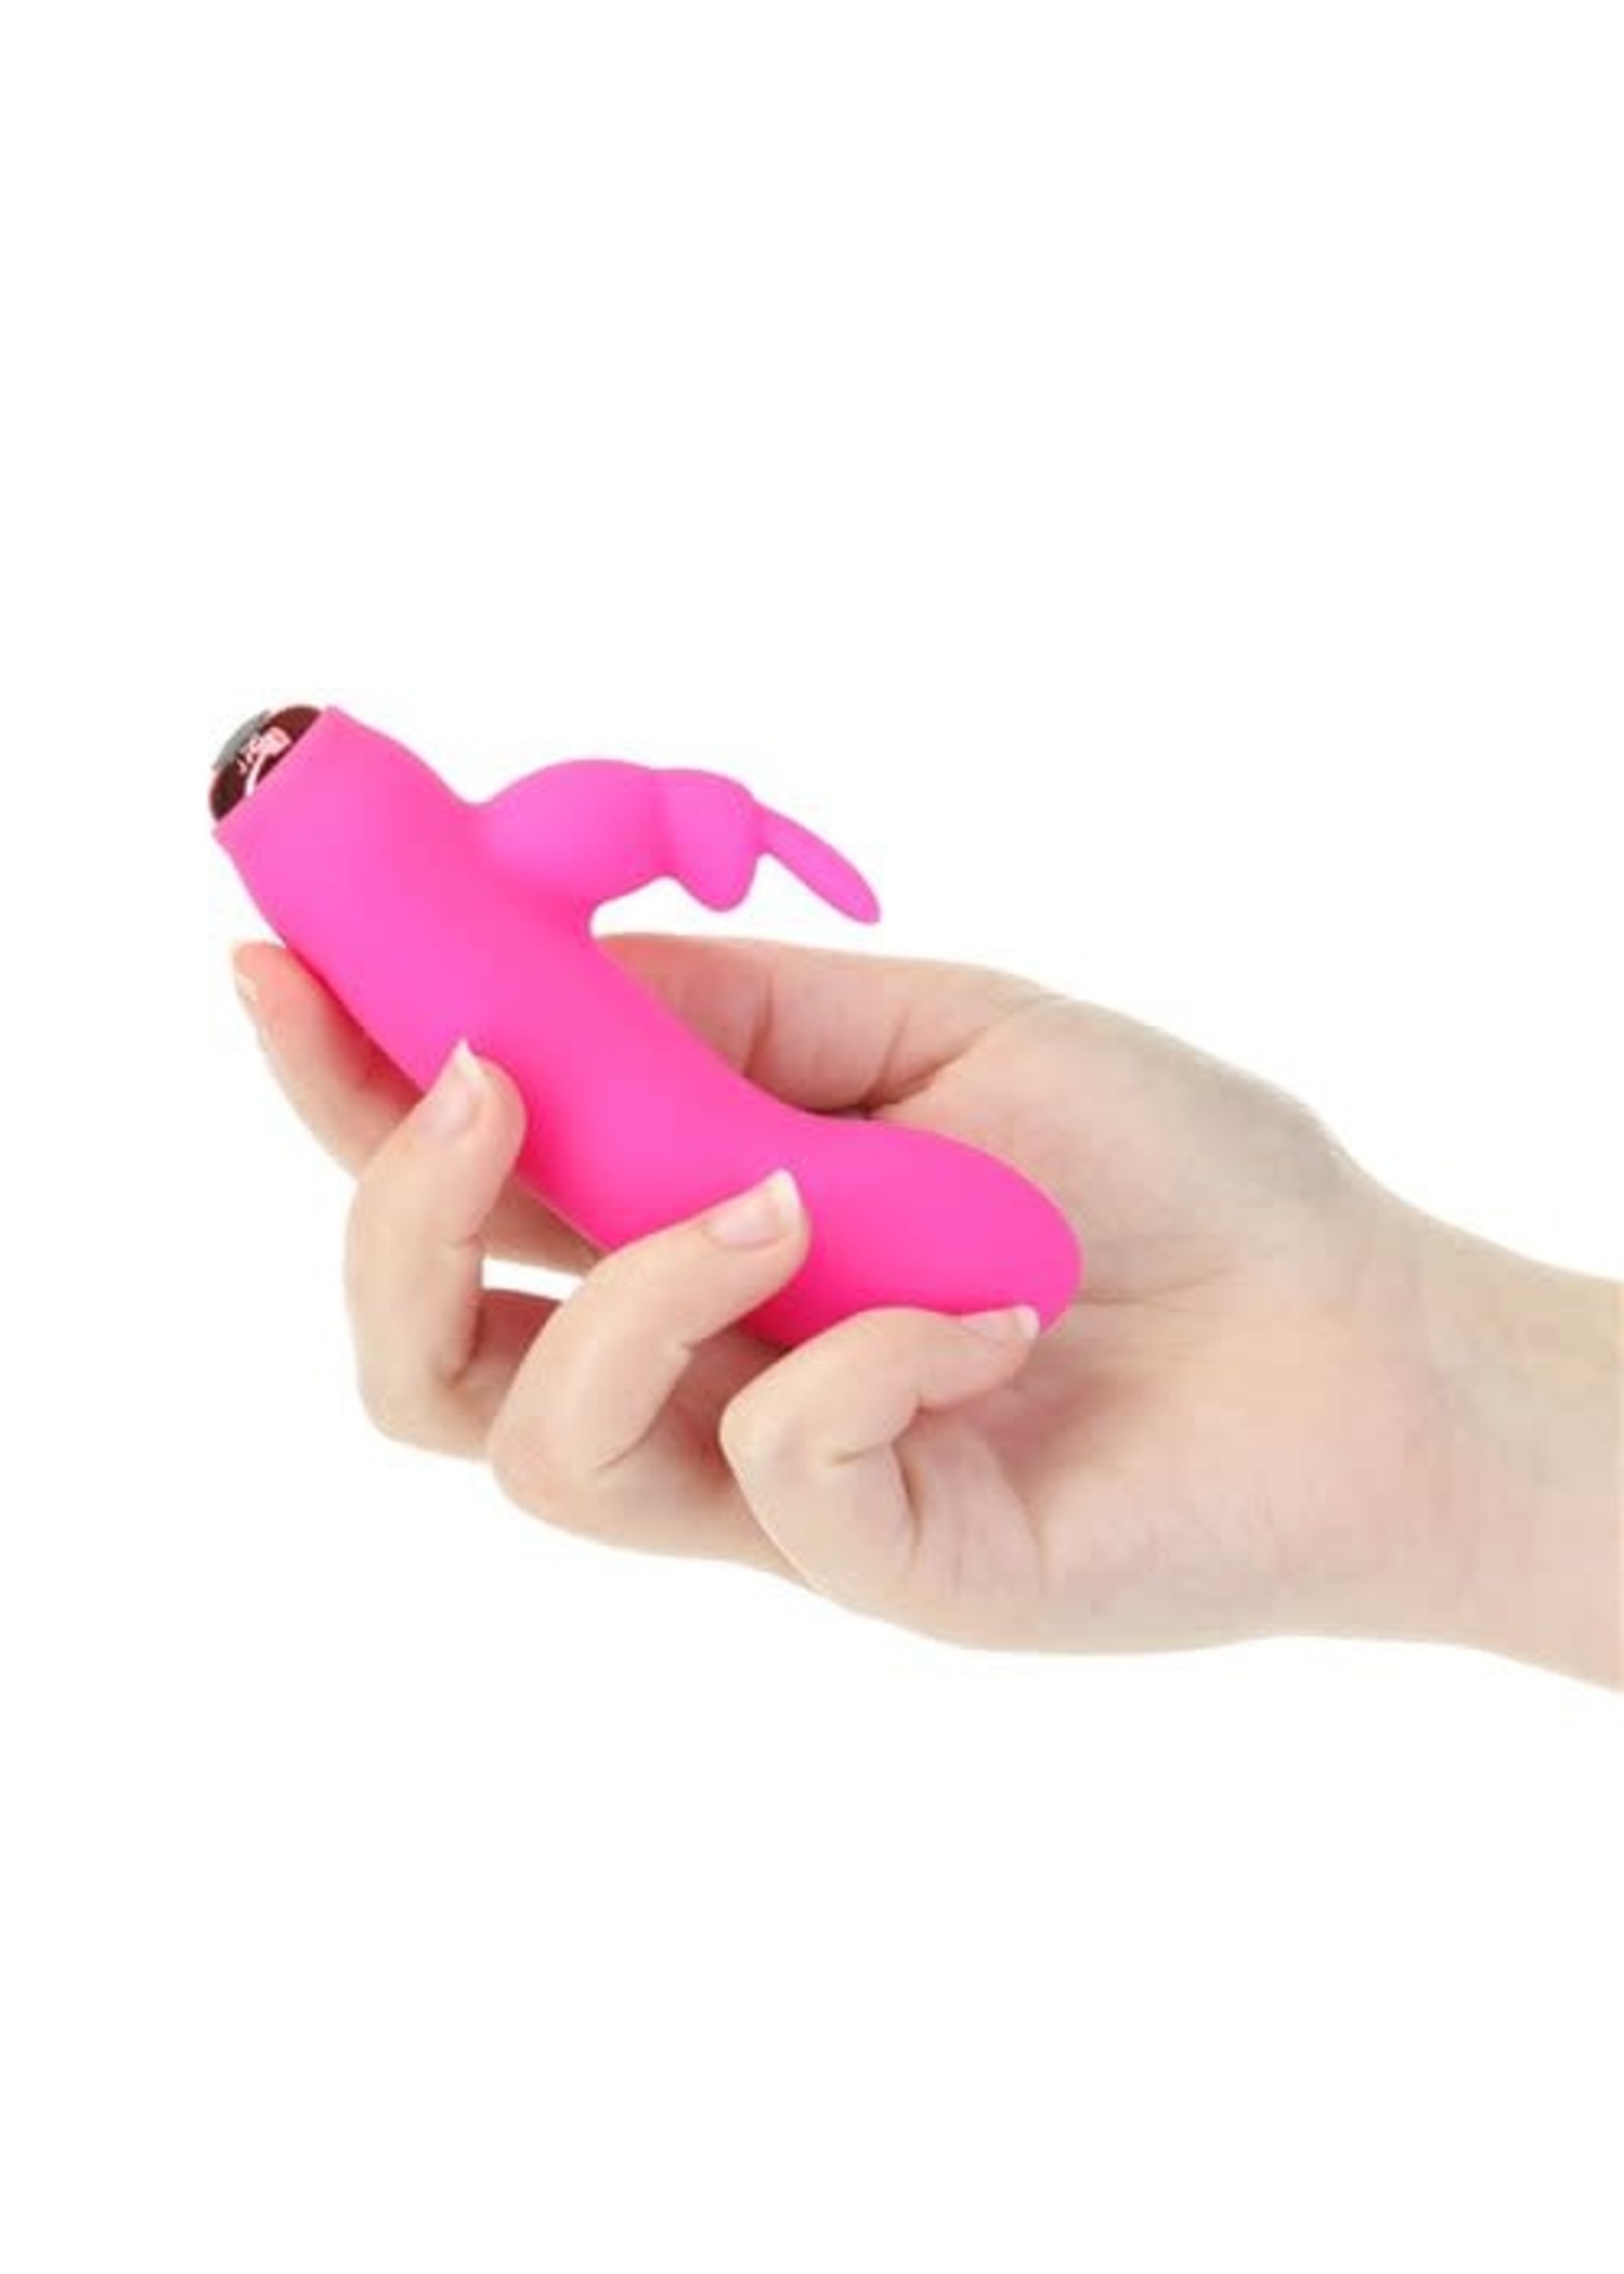 ALICE'S BUNNY - RECHARGEABLE BULLET WITH REMOVABLE RABBIT SLEEVE - PINK